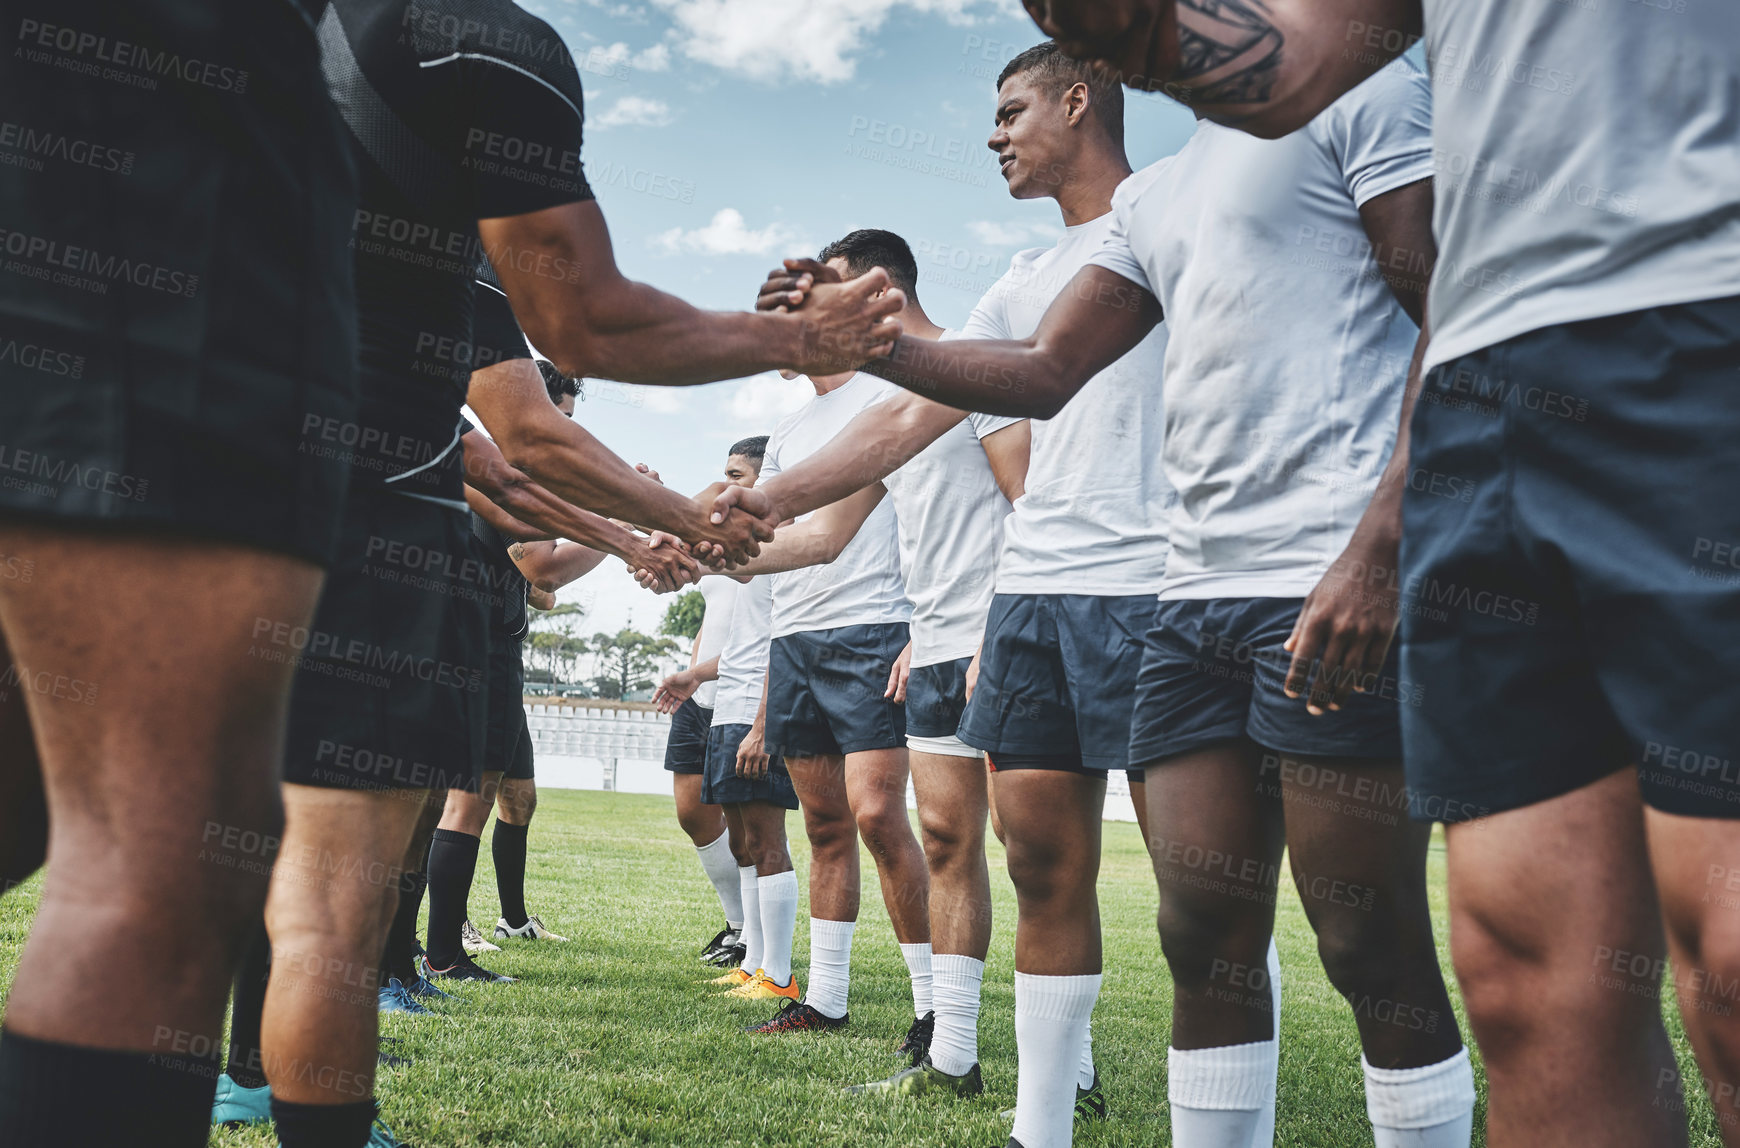 Buy stock photo Cropped shot of a group of young rugby players shaking each other's hands to congratulate in playing a good game outside on a filed